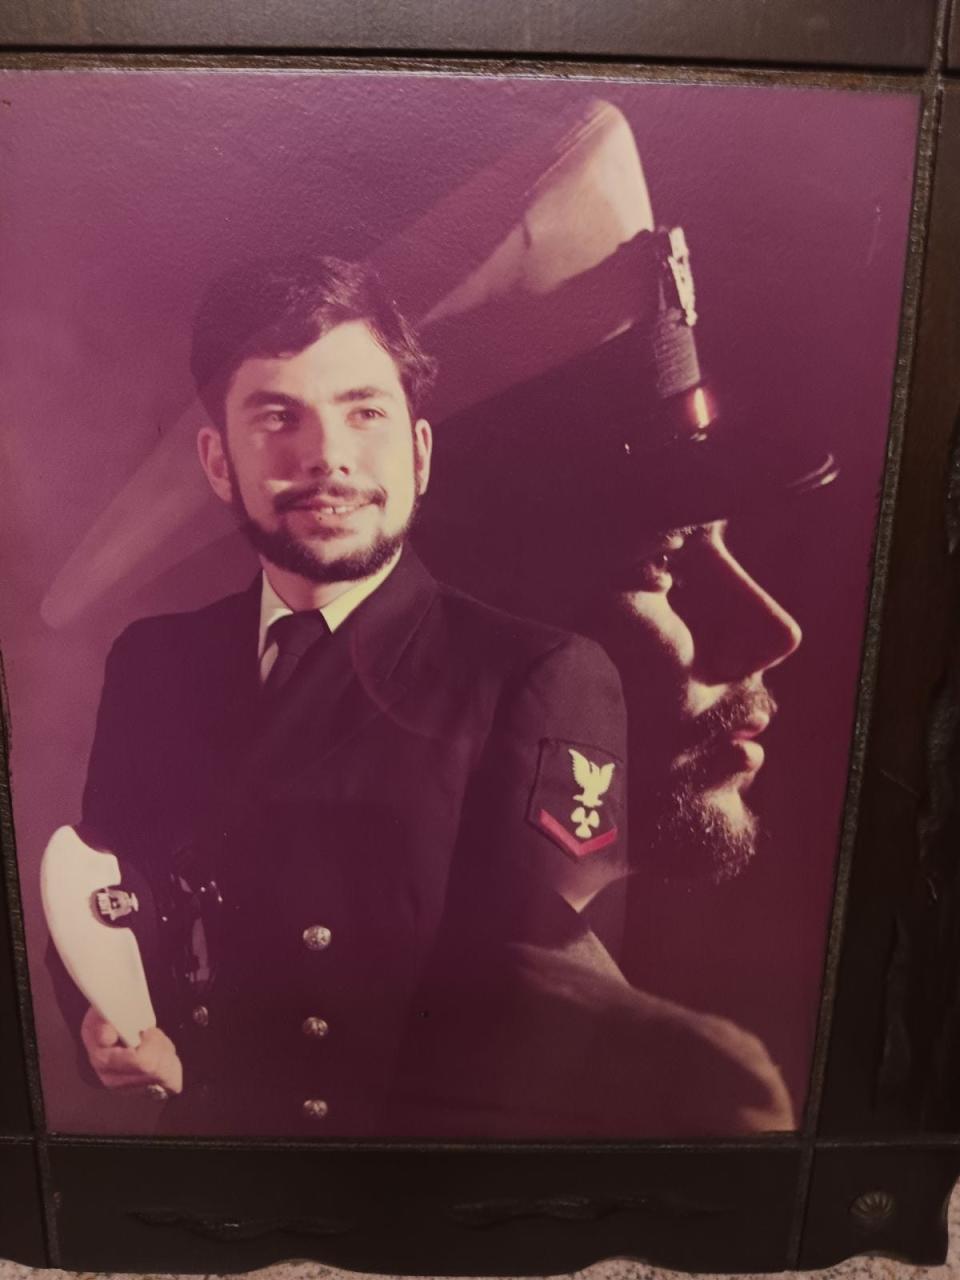 A photo of Paul Mistrette during his time with the Navy in 1978.